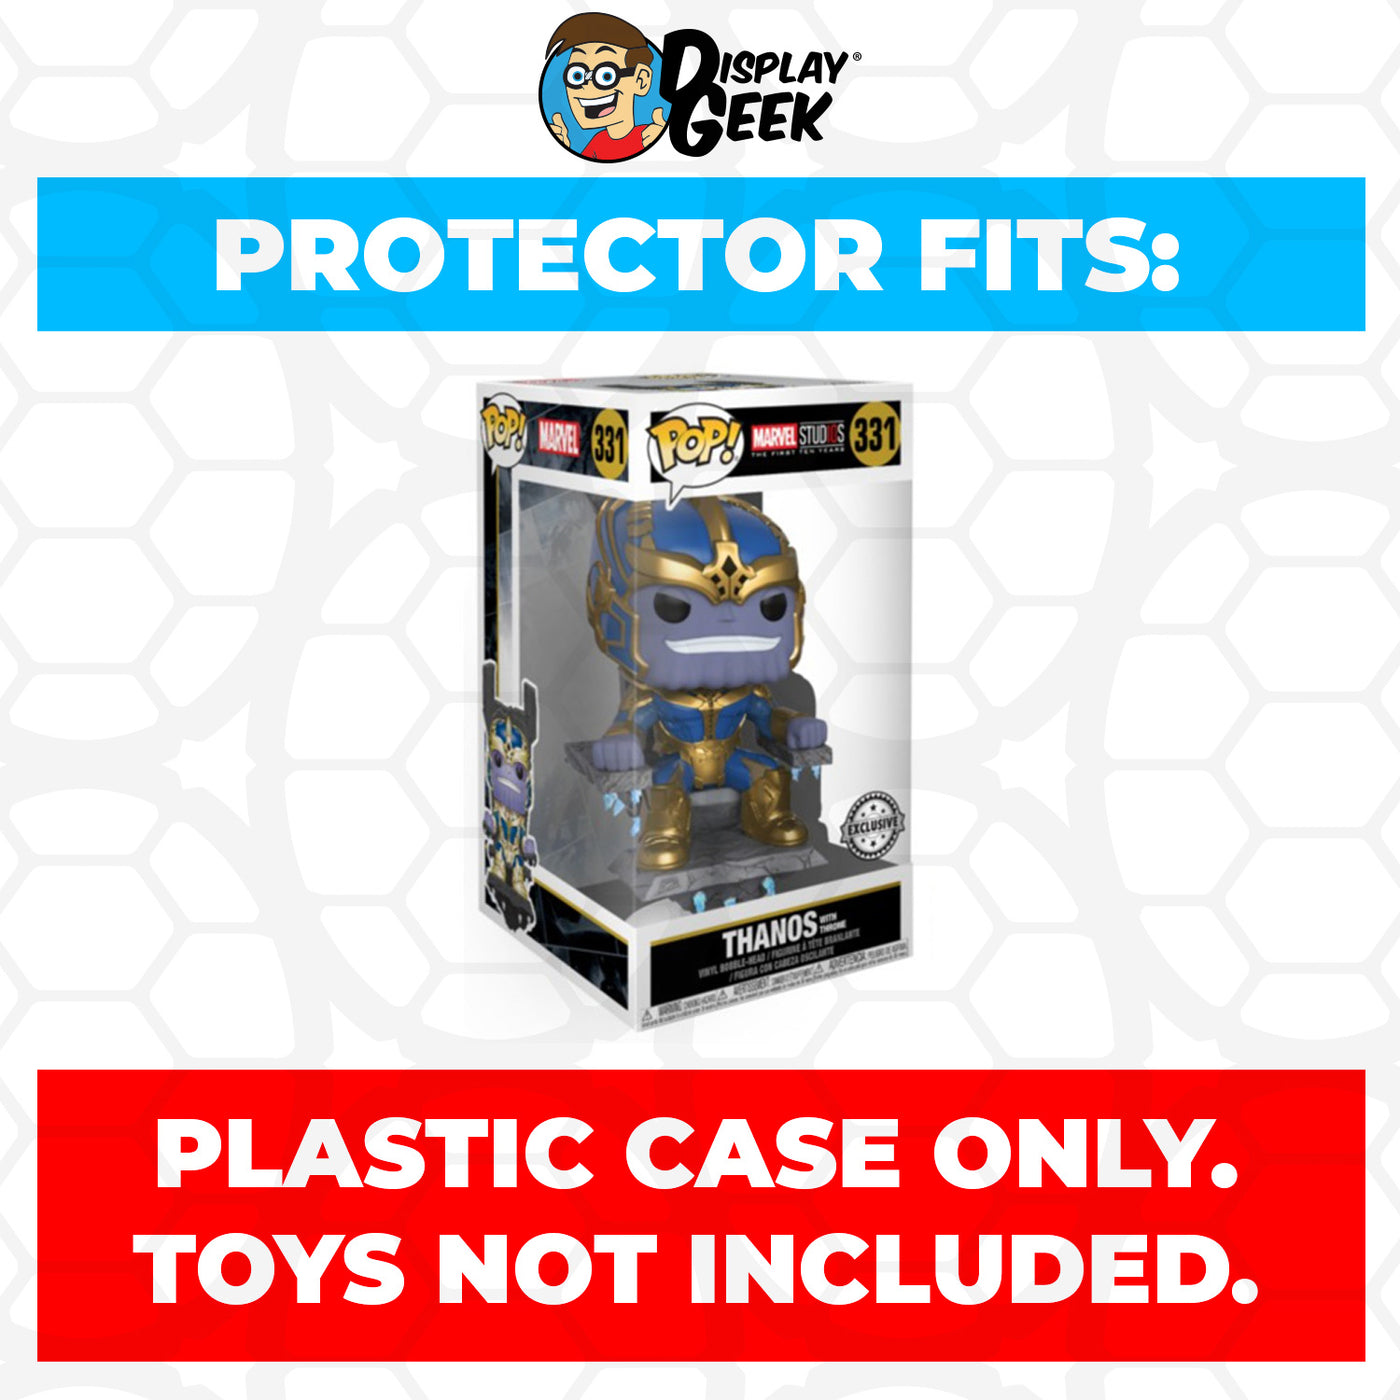 Pop Protector for 6 inch Thanos with Throne #331 Super Funko Pop on The Protector Guide App by Display Geek